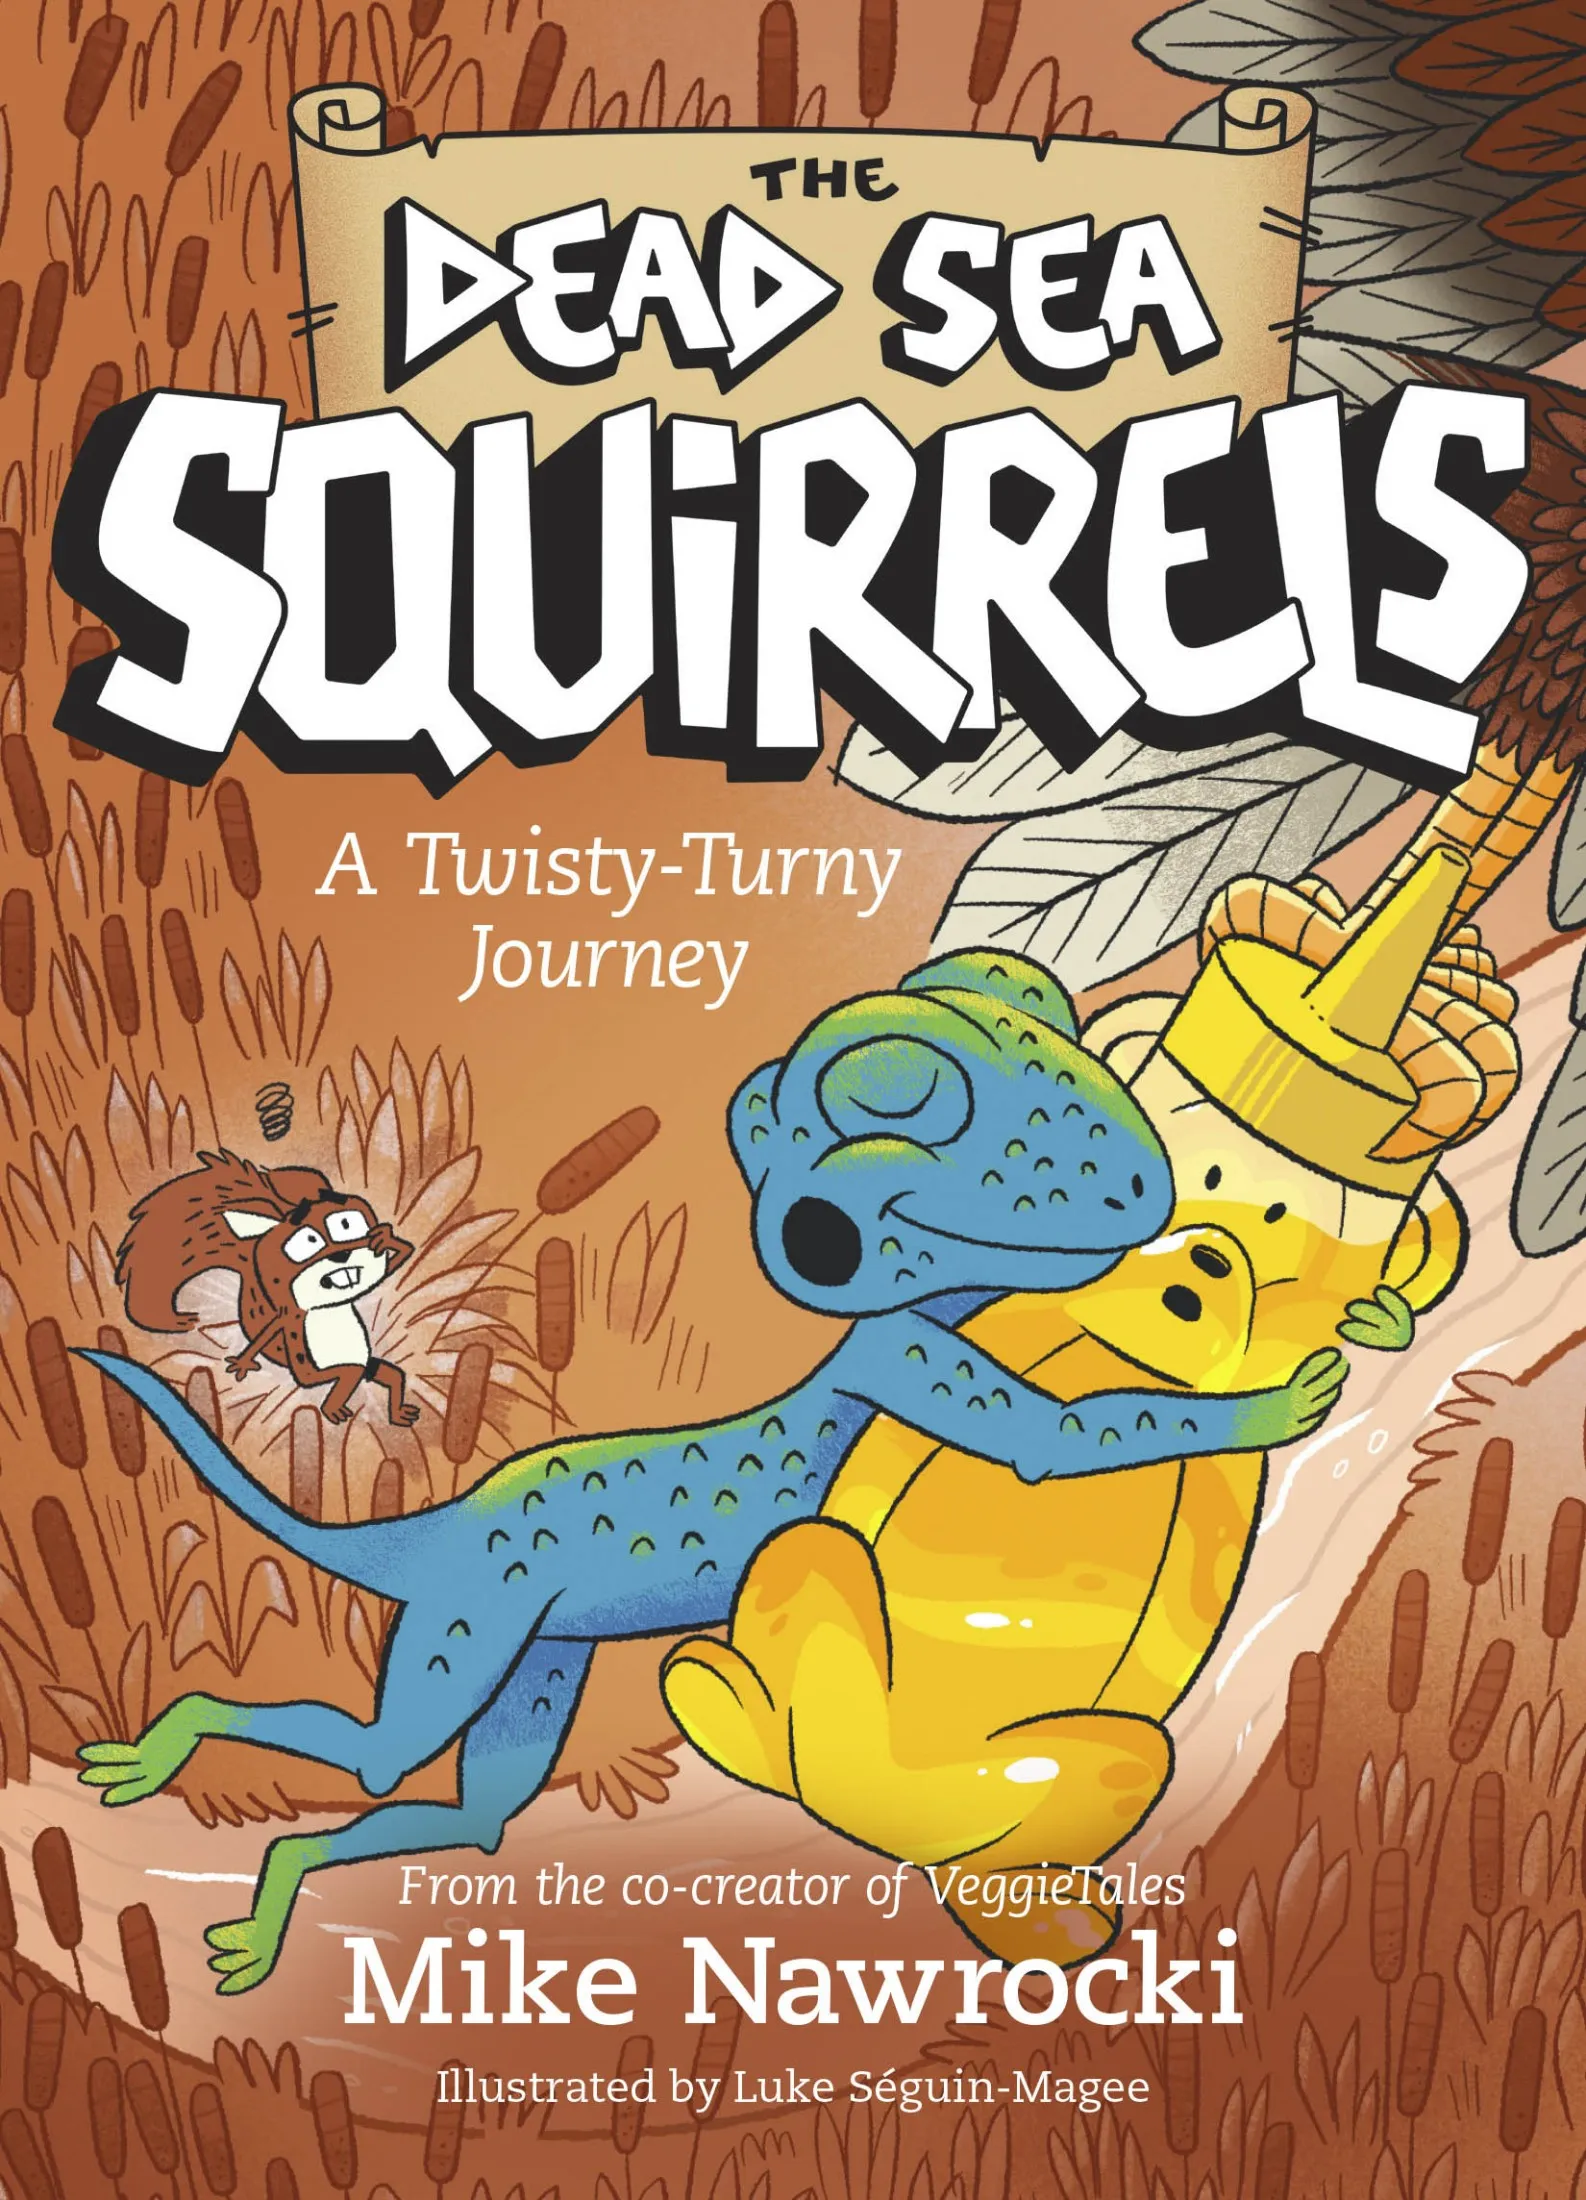 A Twisty-Turny Journey (The Dead Sea Squirrels #11)